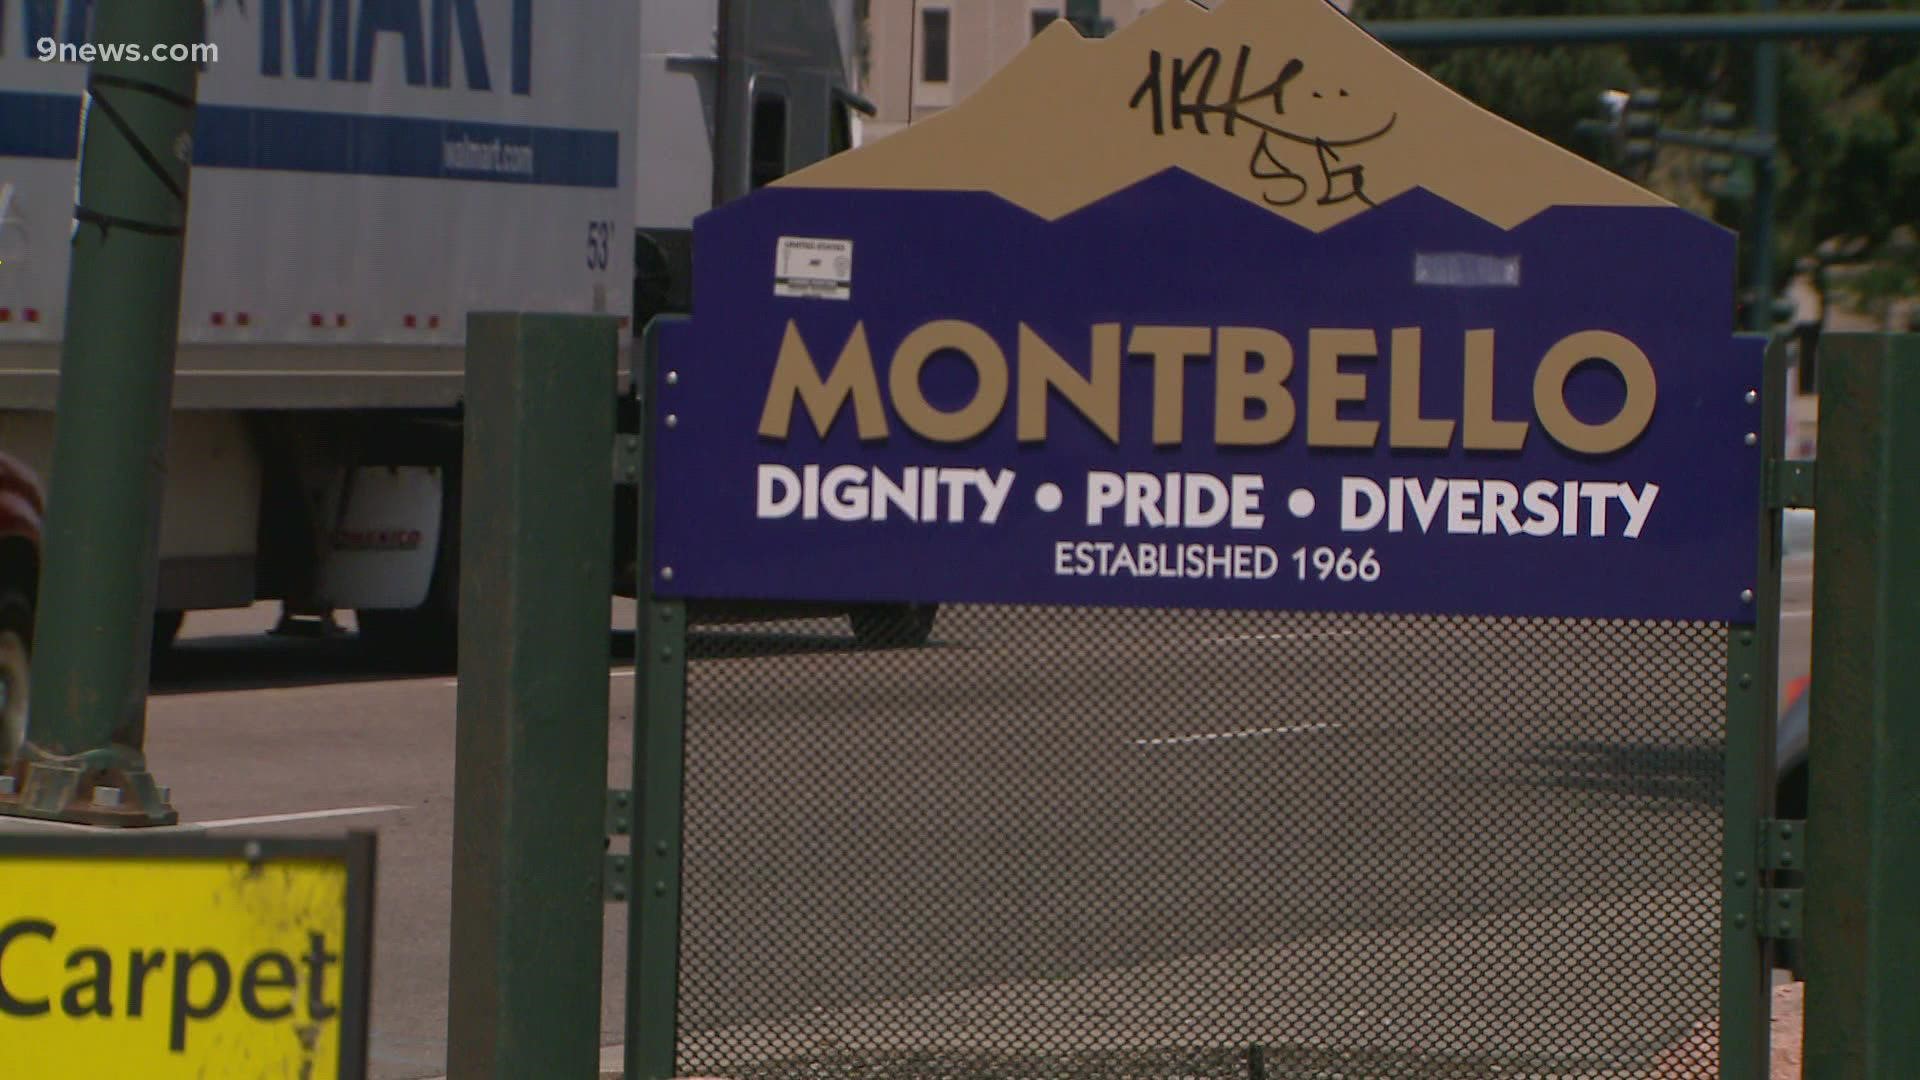 Denver considers a pilot program to help people in Montbello get around – like offering free rides in the neighborhood to and from local rail stations.